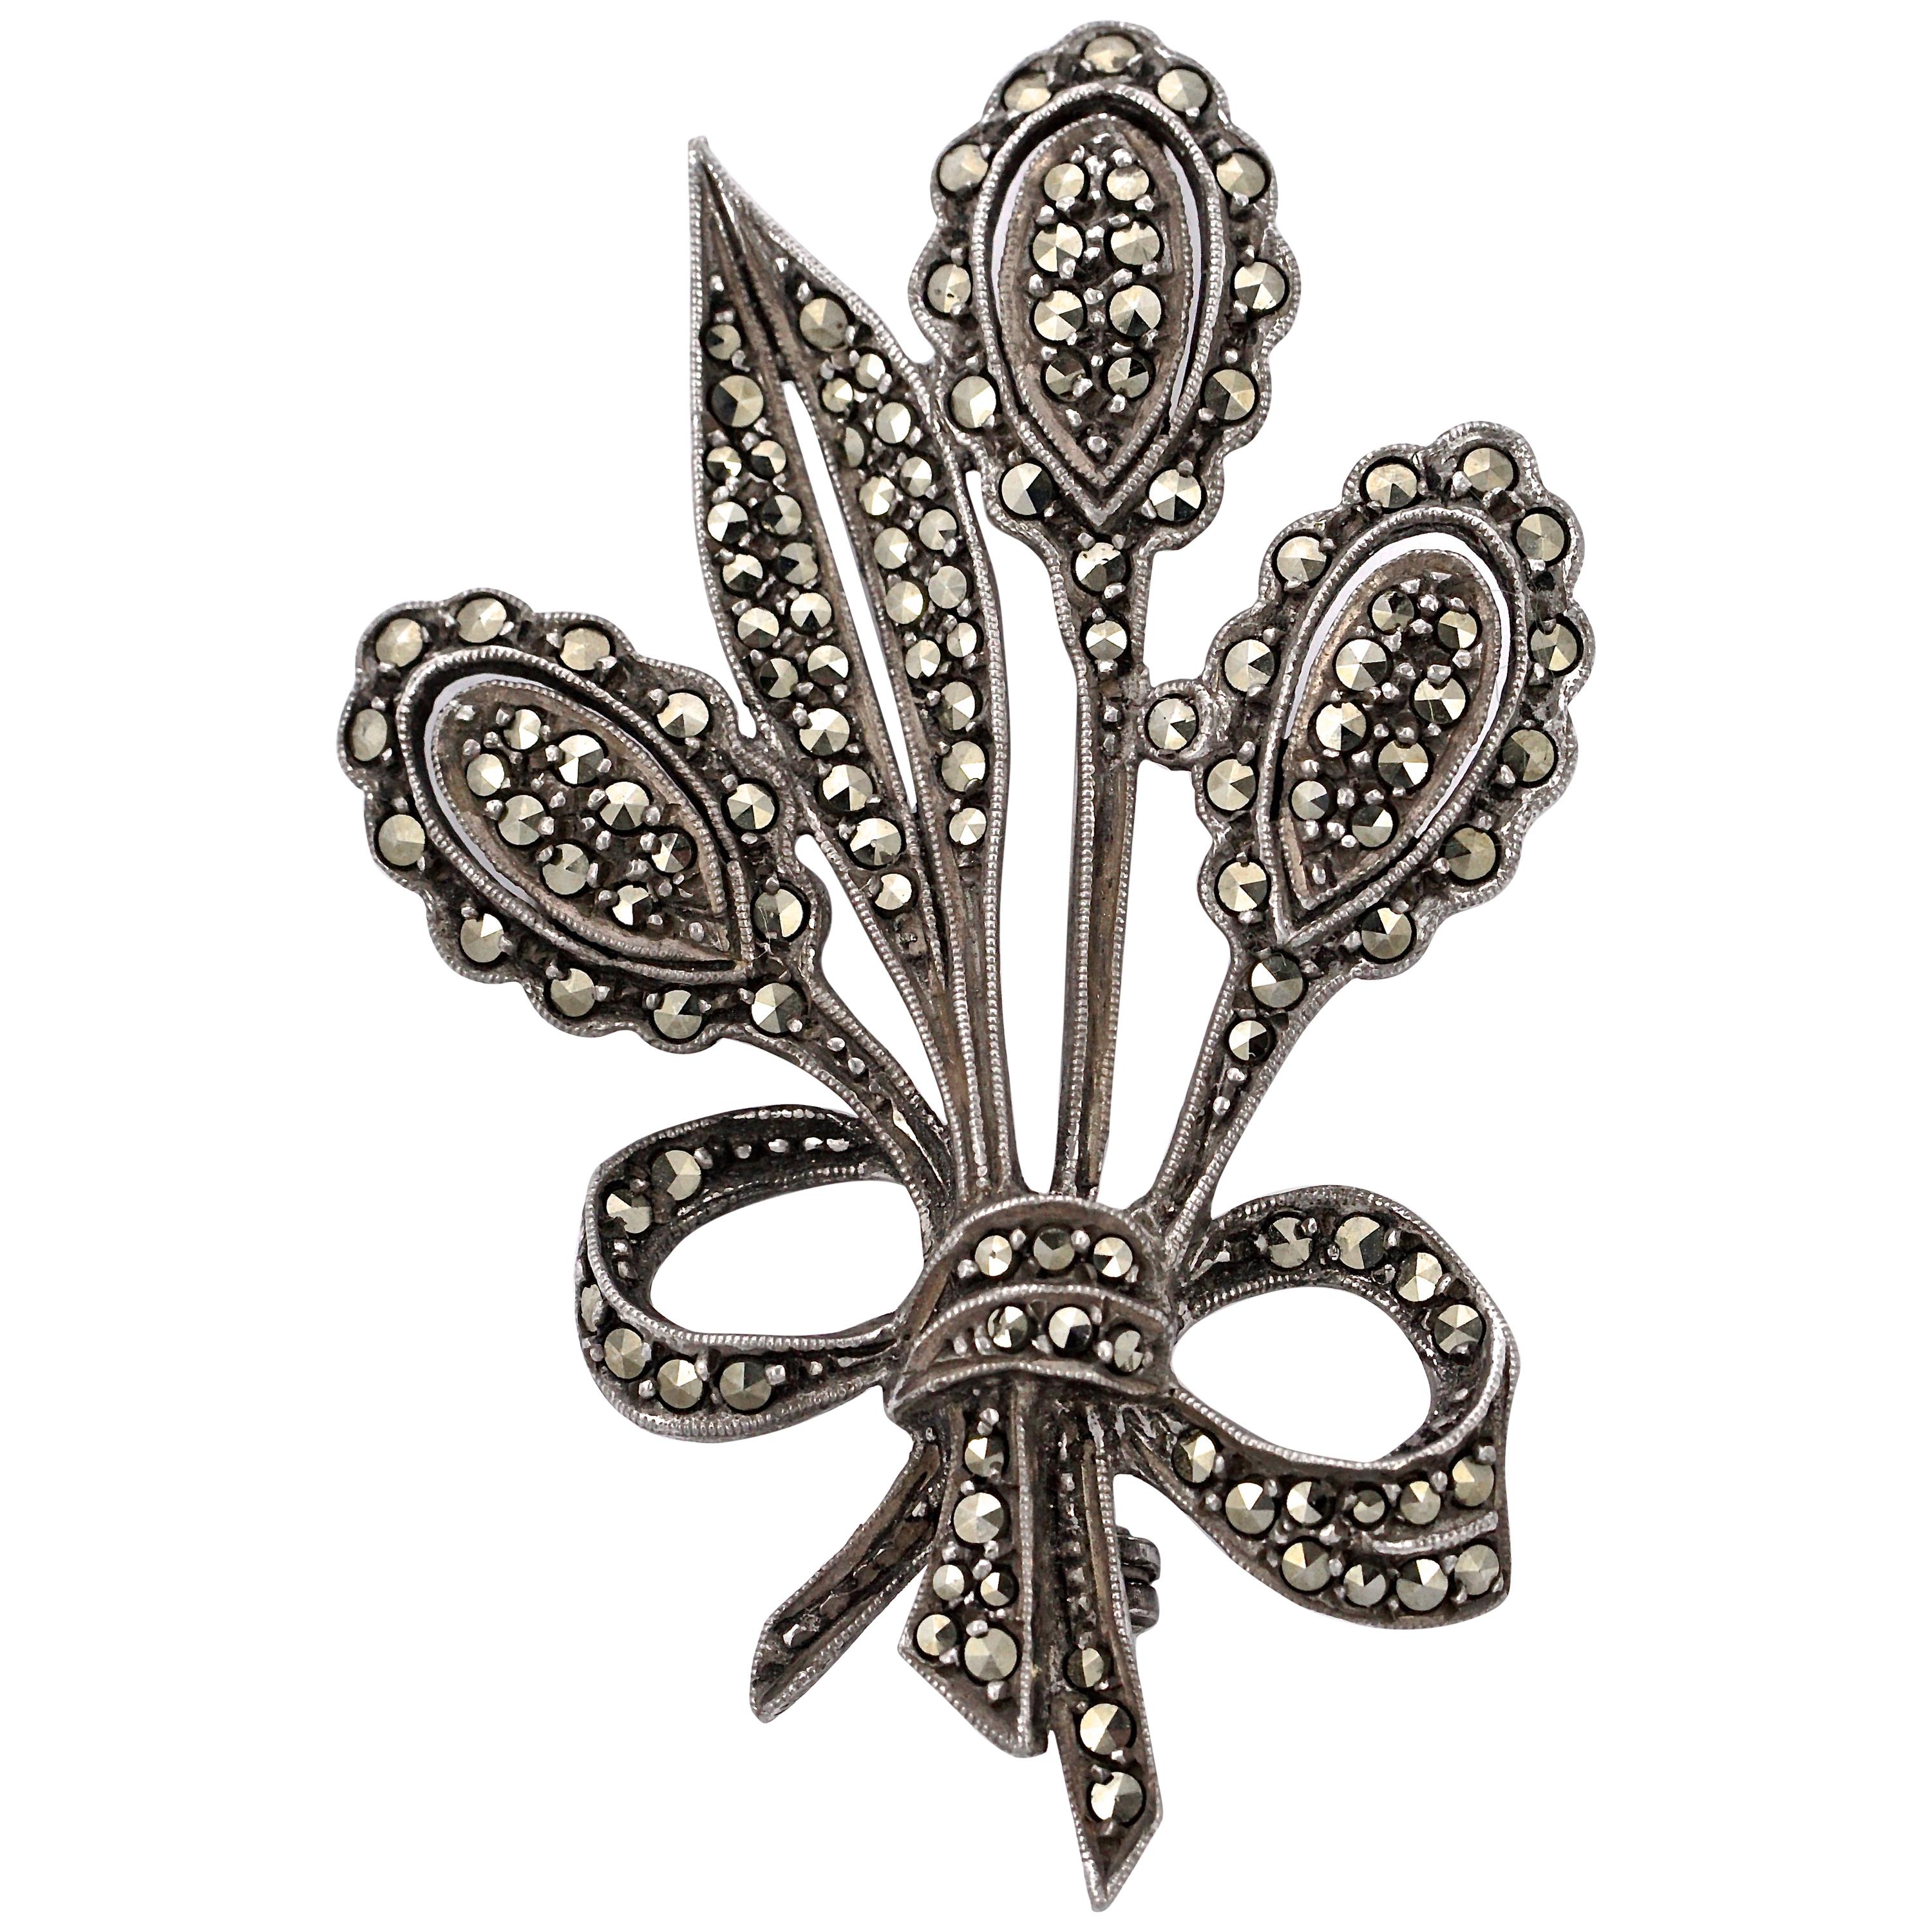 Silver and Marcasite Flower and Bow Brooch circa 1930s